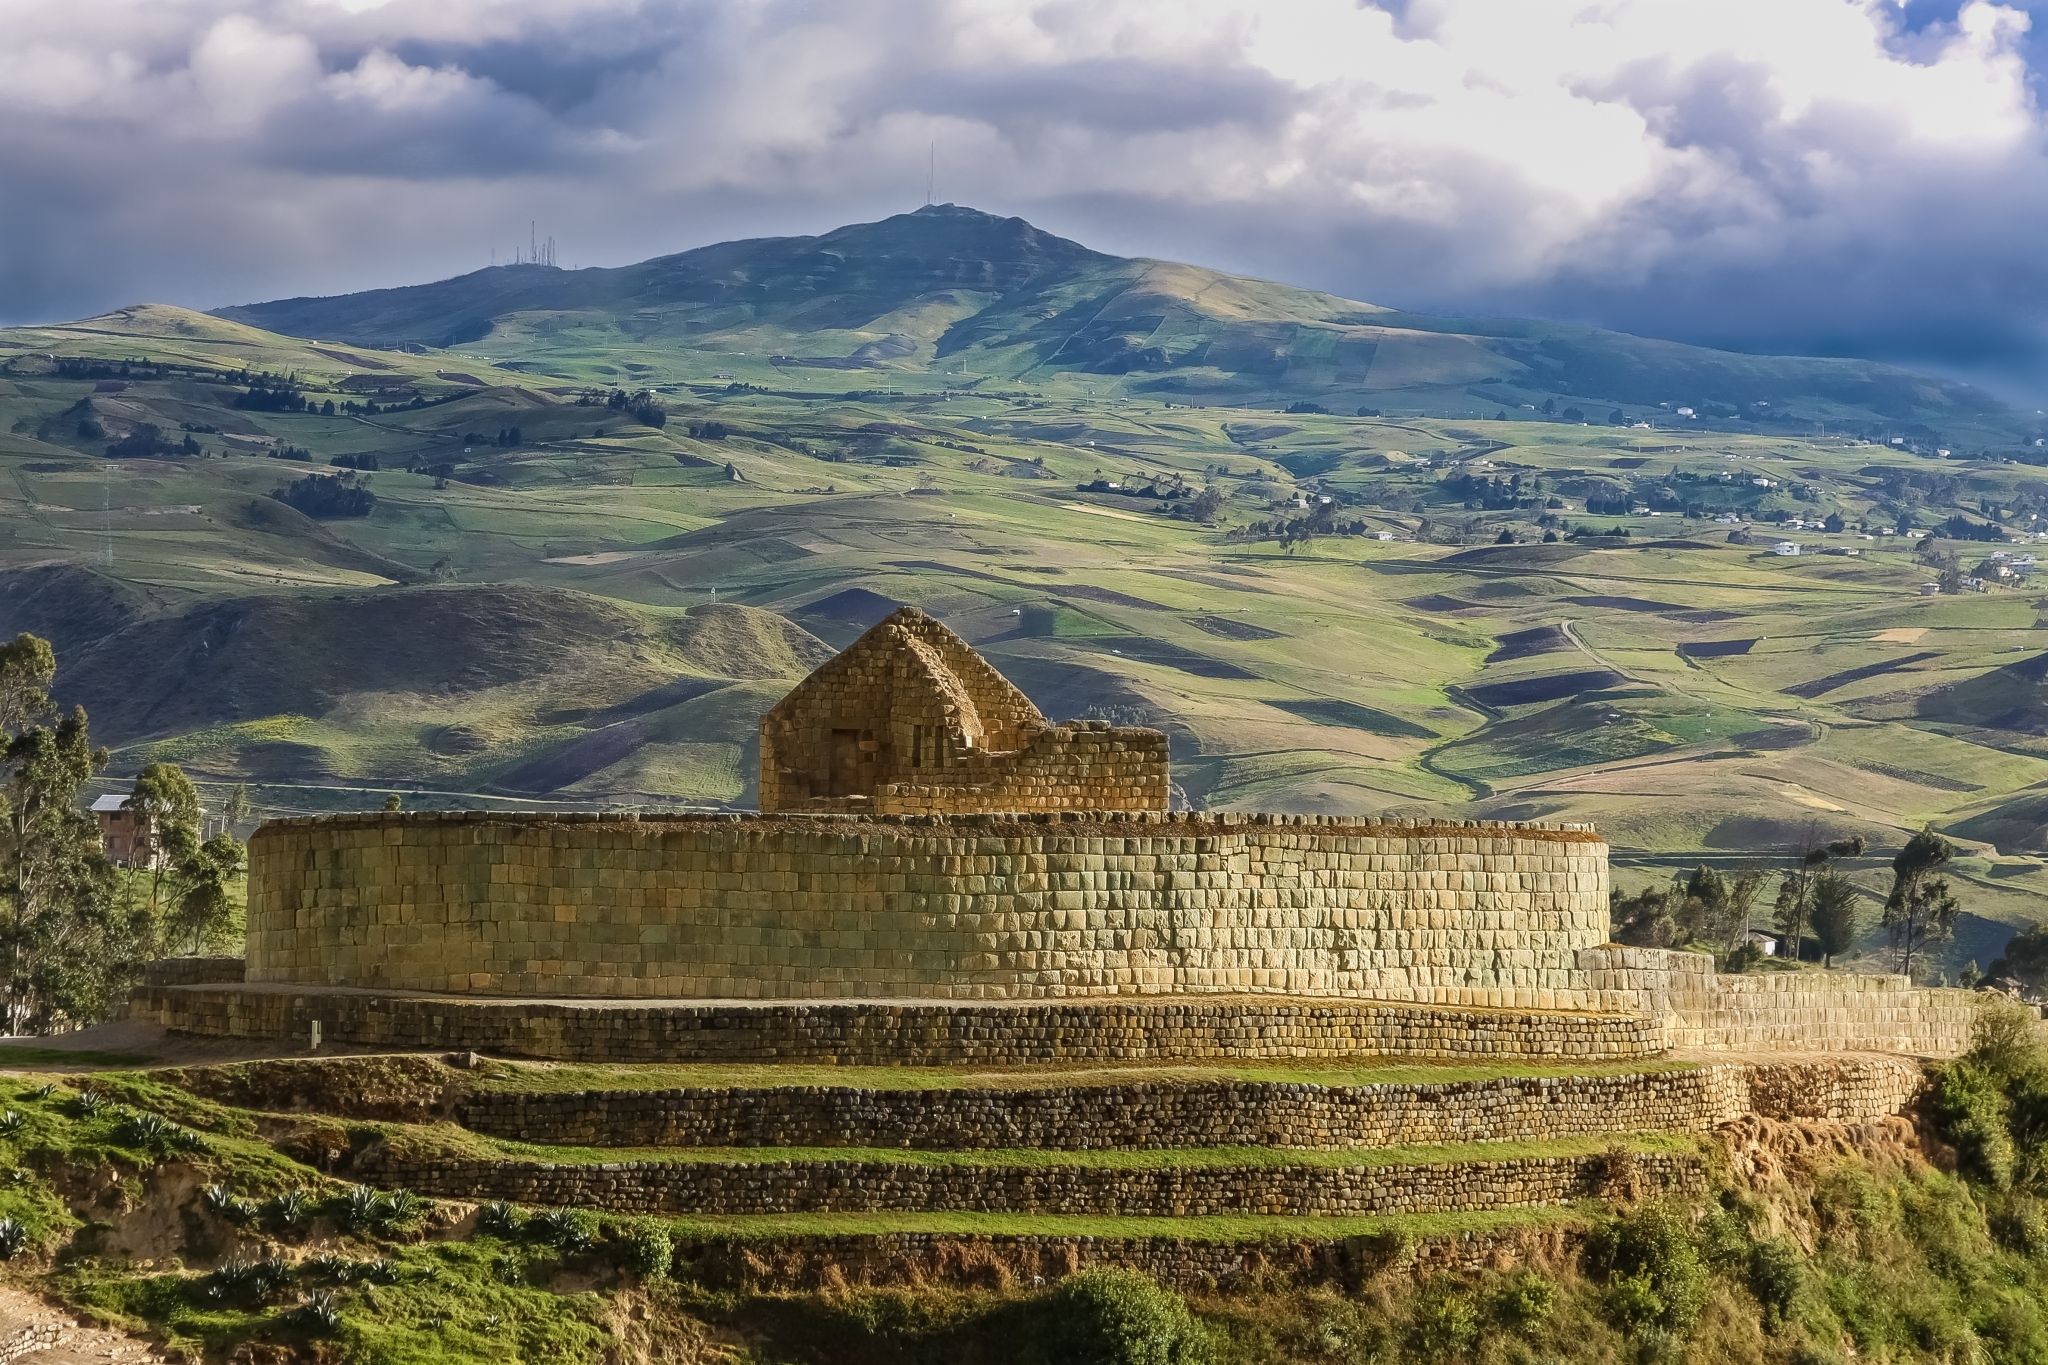 Ingapirca Incan ruins, an ancient site in South America